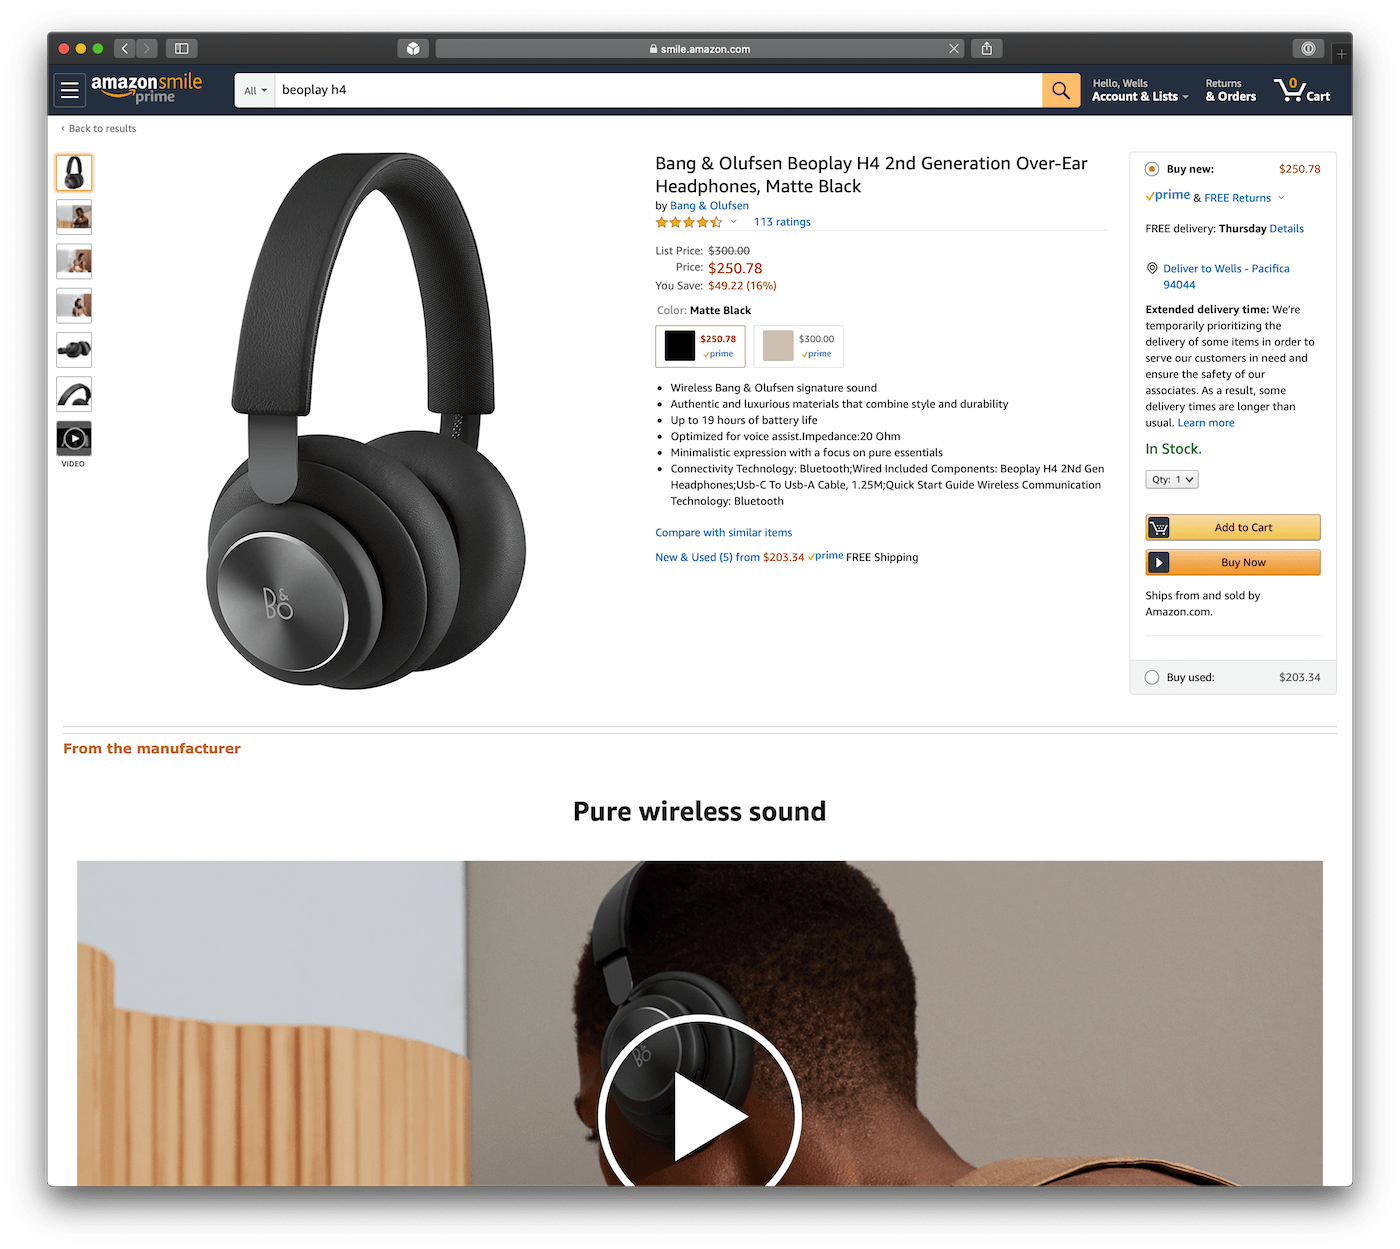 amazon.com product page after